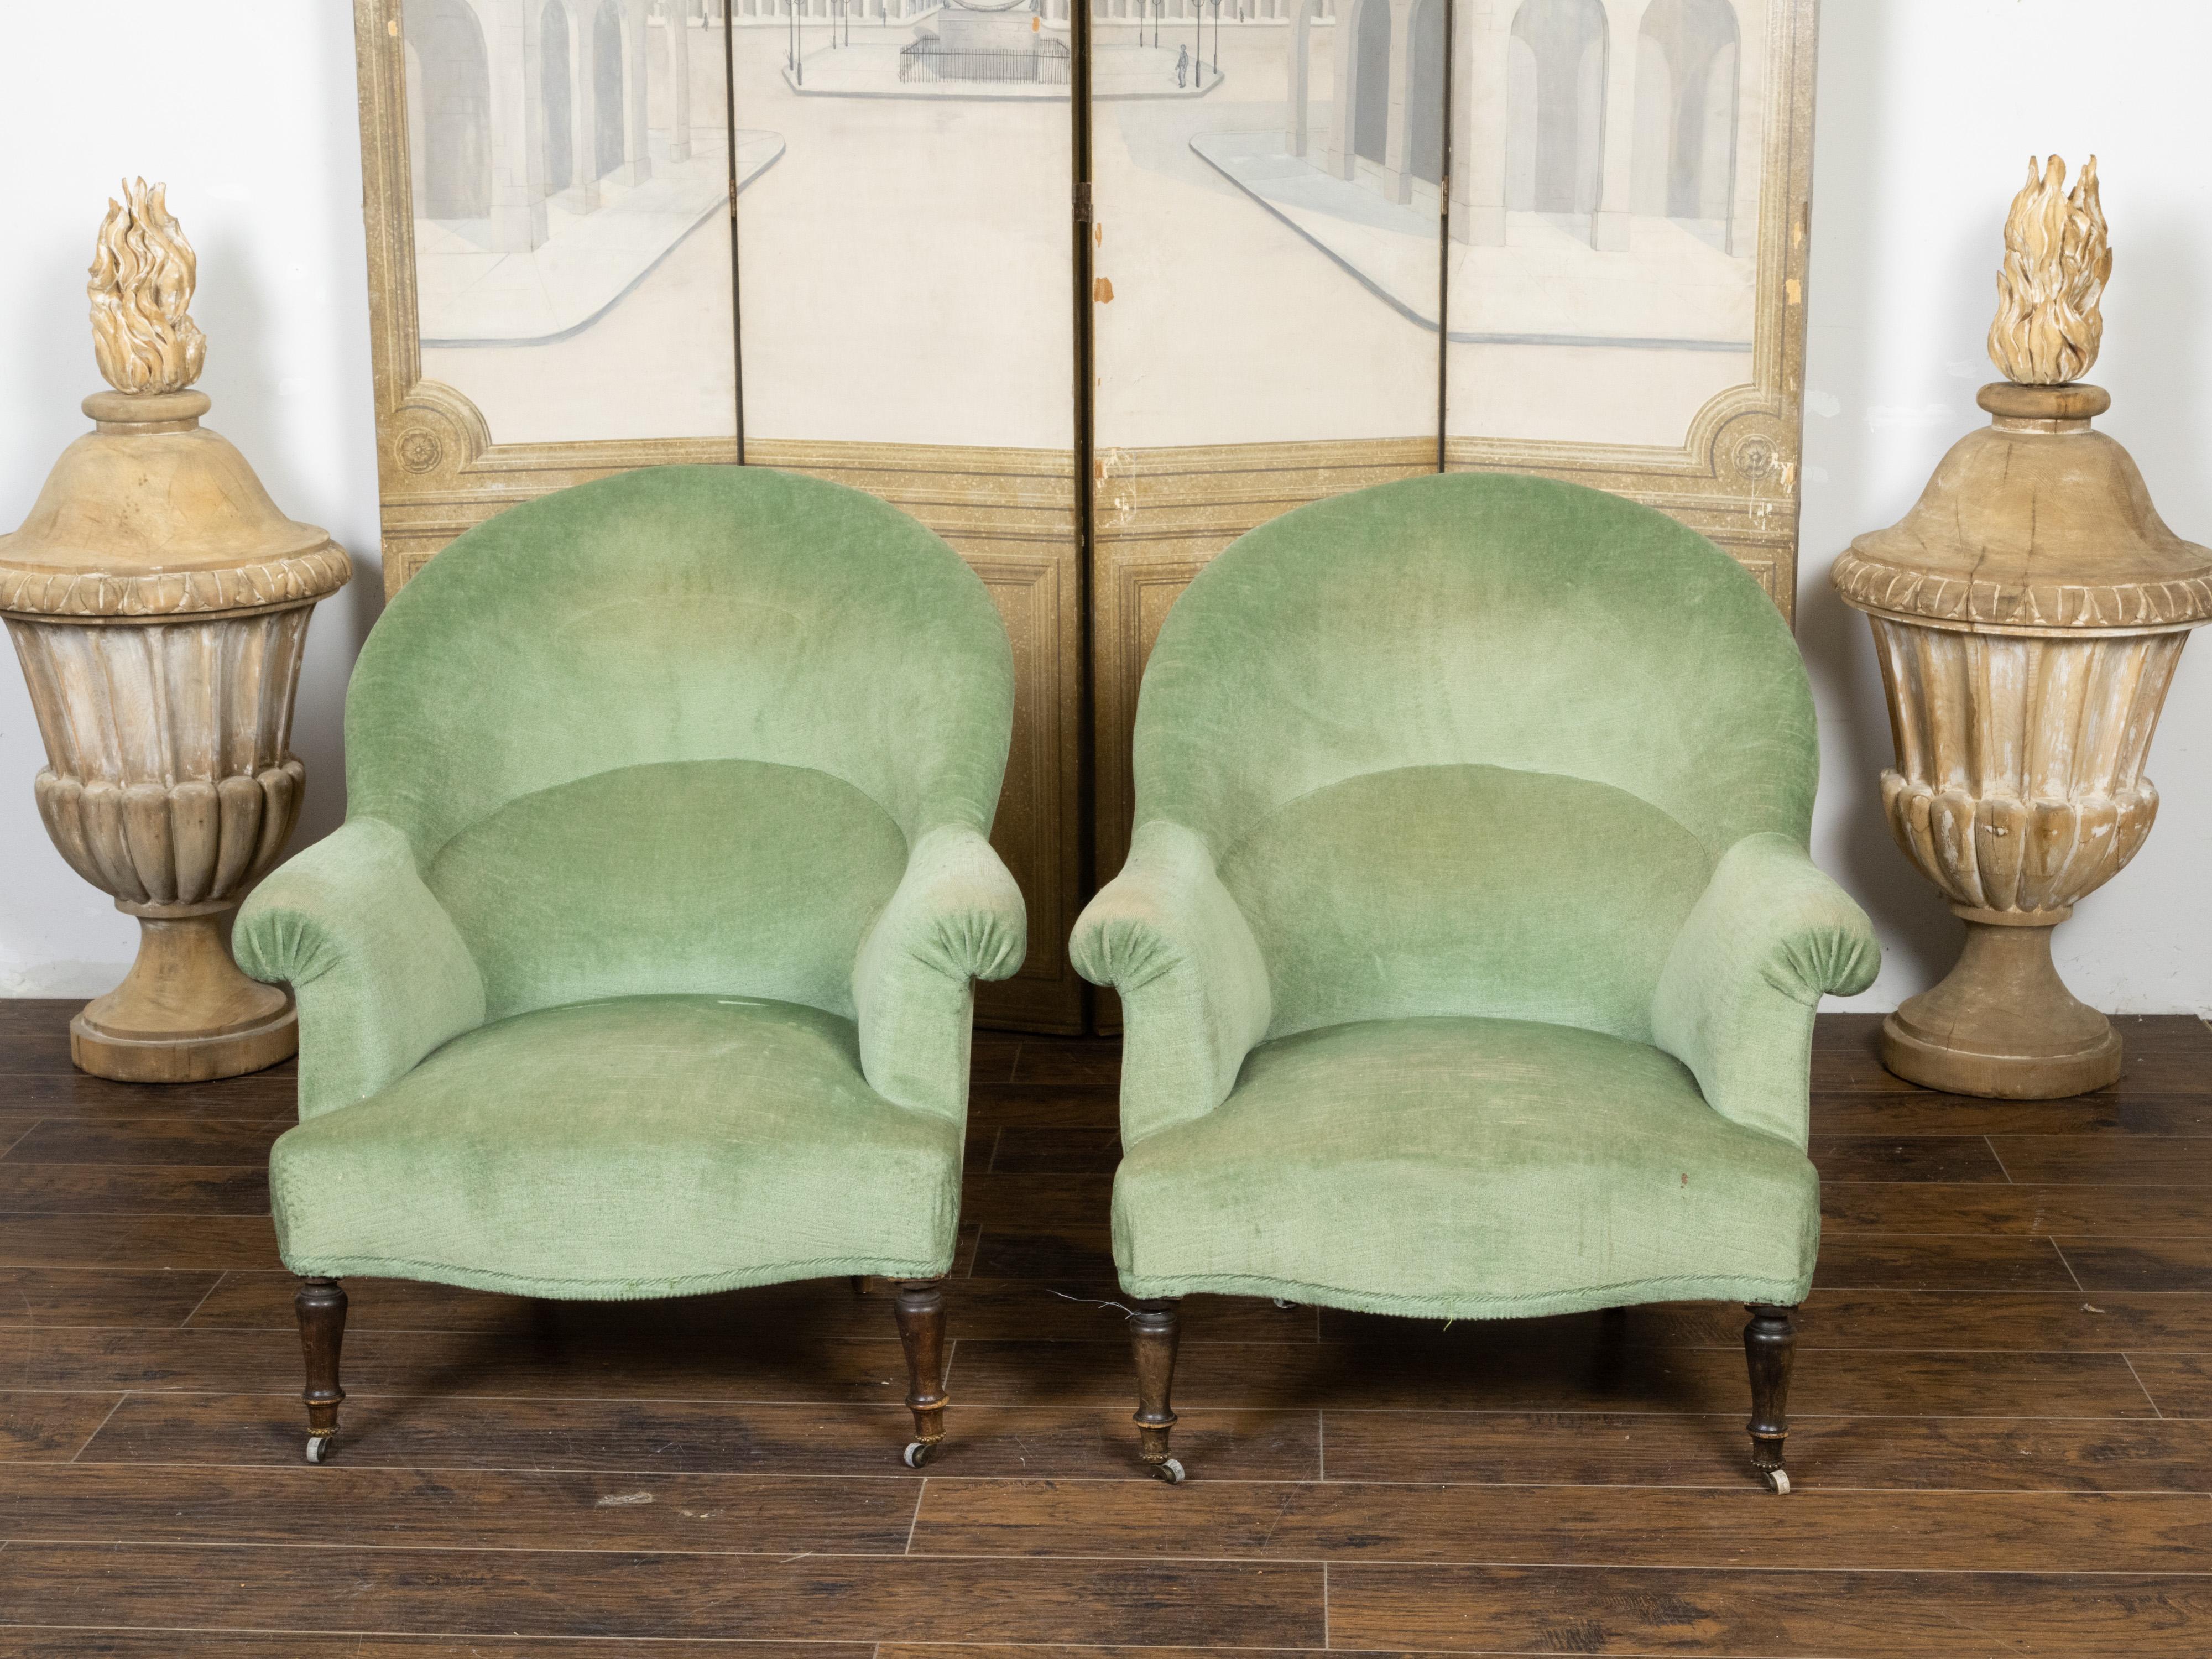 A pair of French turn of the century upholstered bergères armchairs from the early 20th century with old green velvet upholstery, out-scrolling arms and turned legs. Created in France at the turn of the century which saw the transition between the